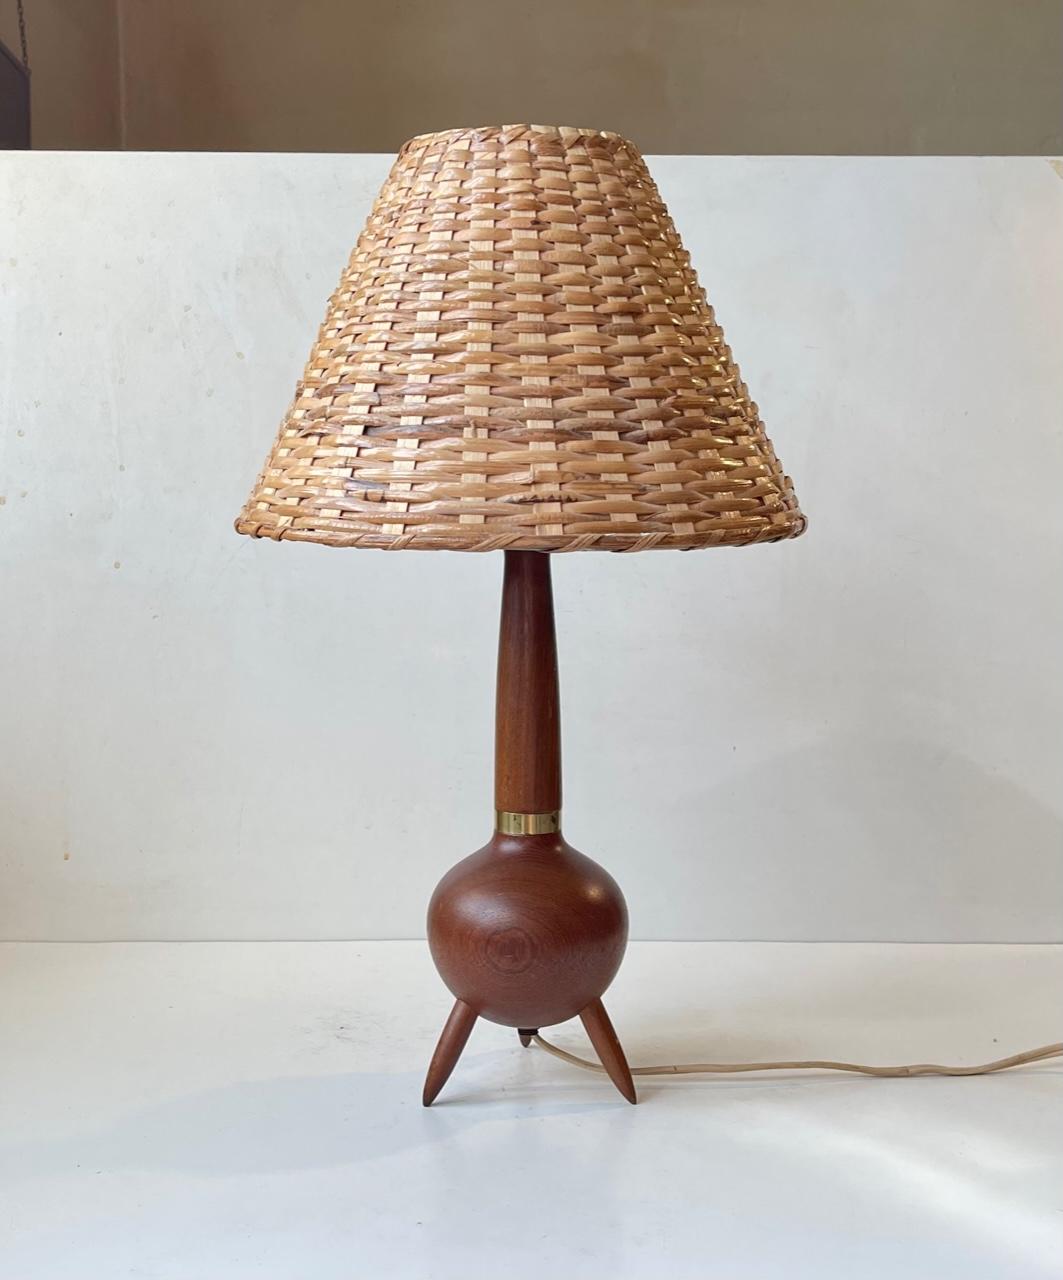 Shaped as a Satellite or Lunar landing vehicle this unusual tripod table light made from solid teak, brass has a beautiful handmade wicker shade. Made/designed anonymously in Scandinavia during the 1960s. Stylistically it corresponds with similar